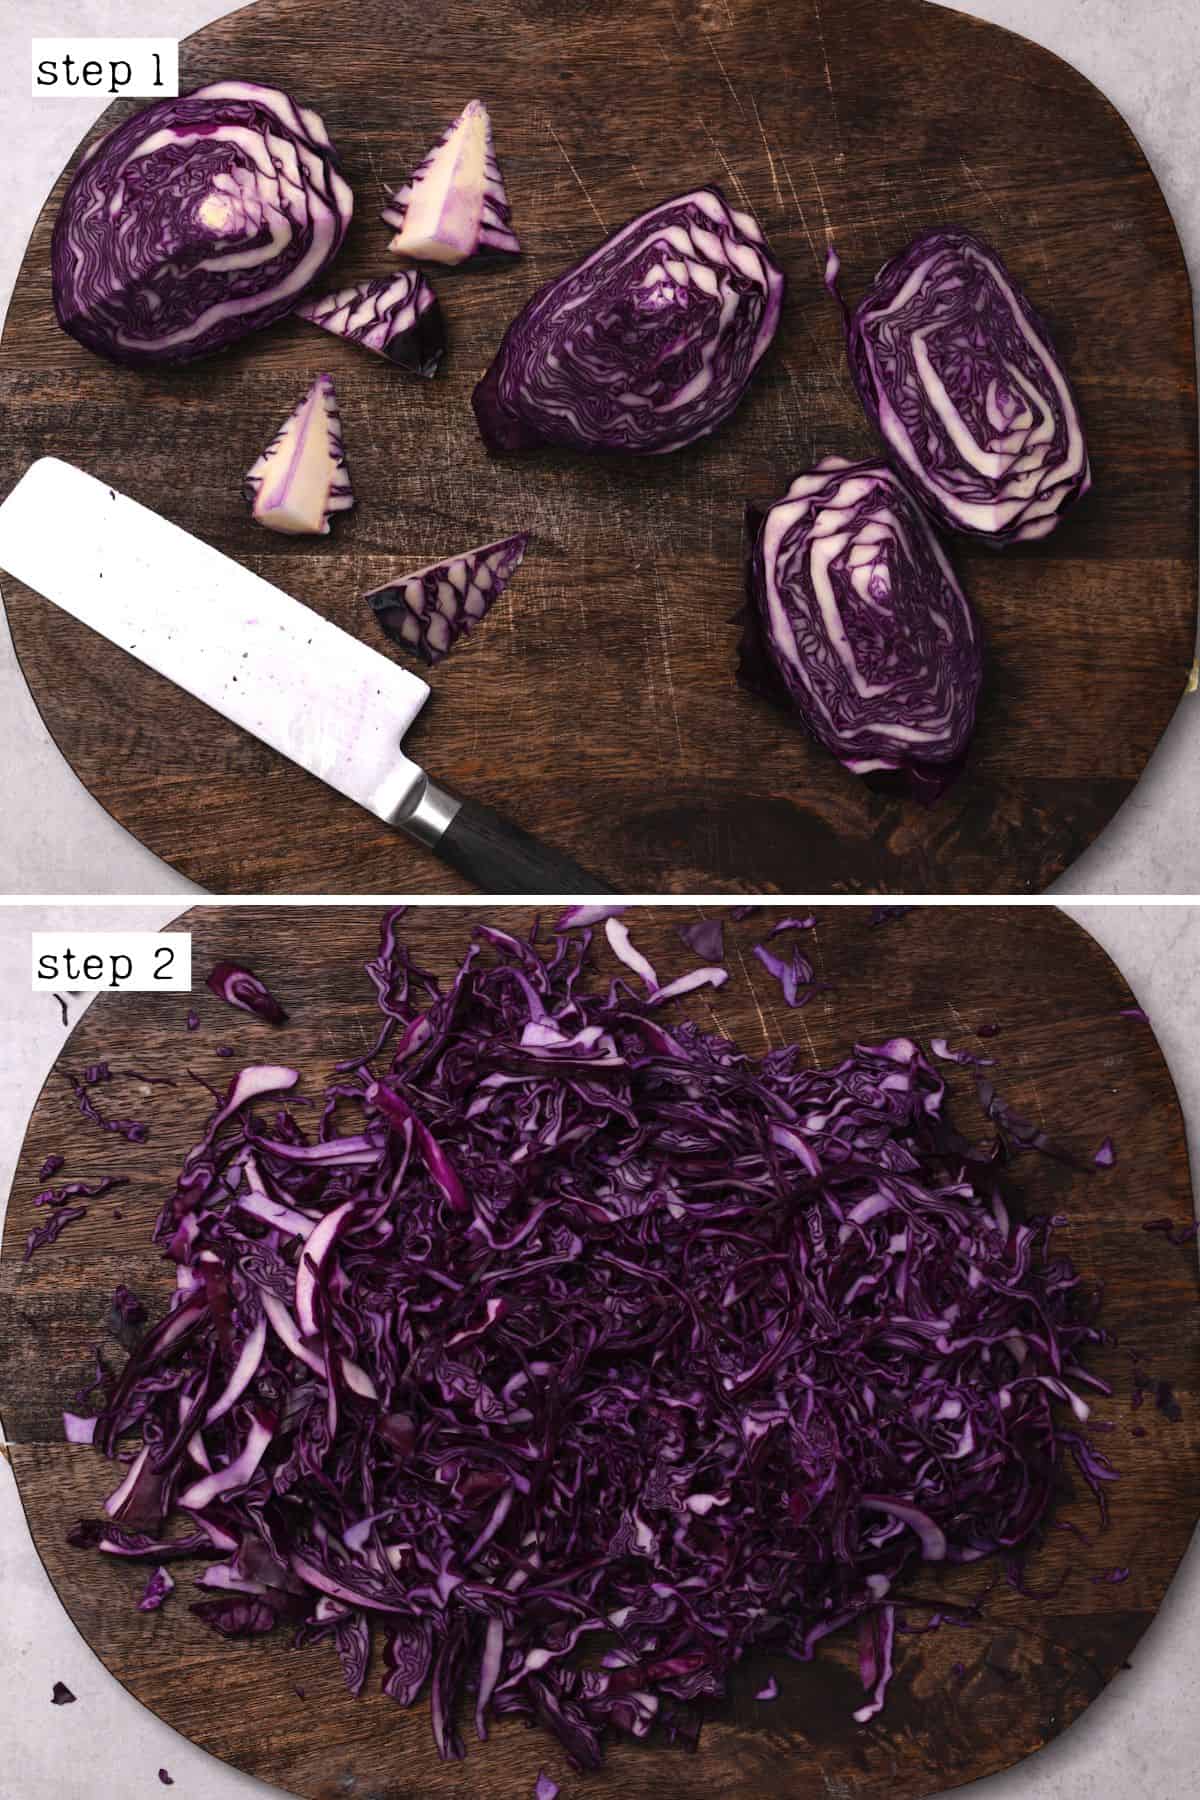 Steps for coring and shredding red cabbage